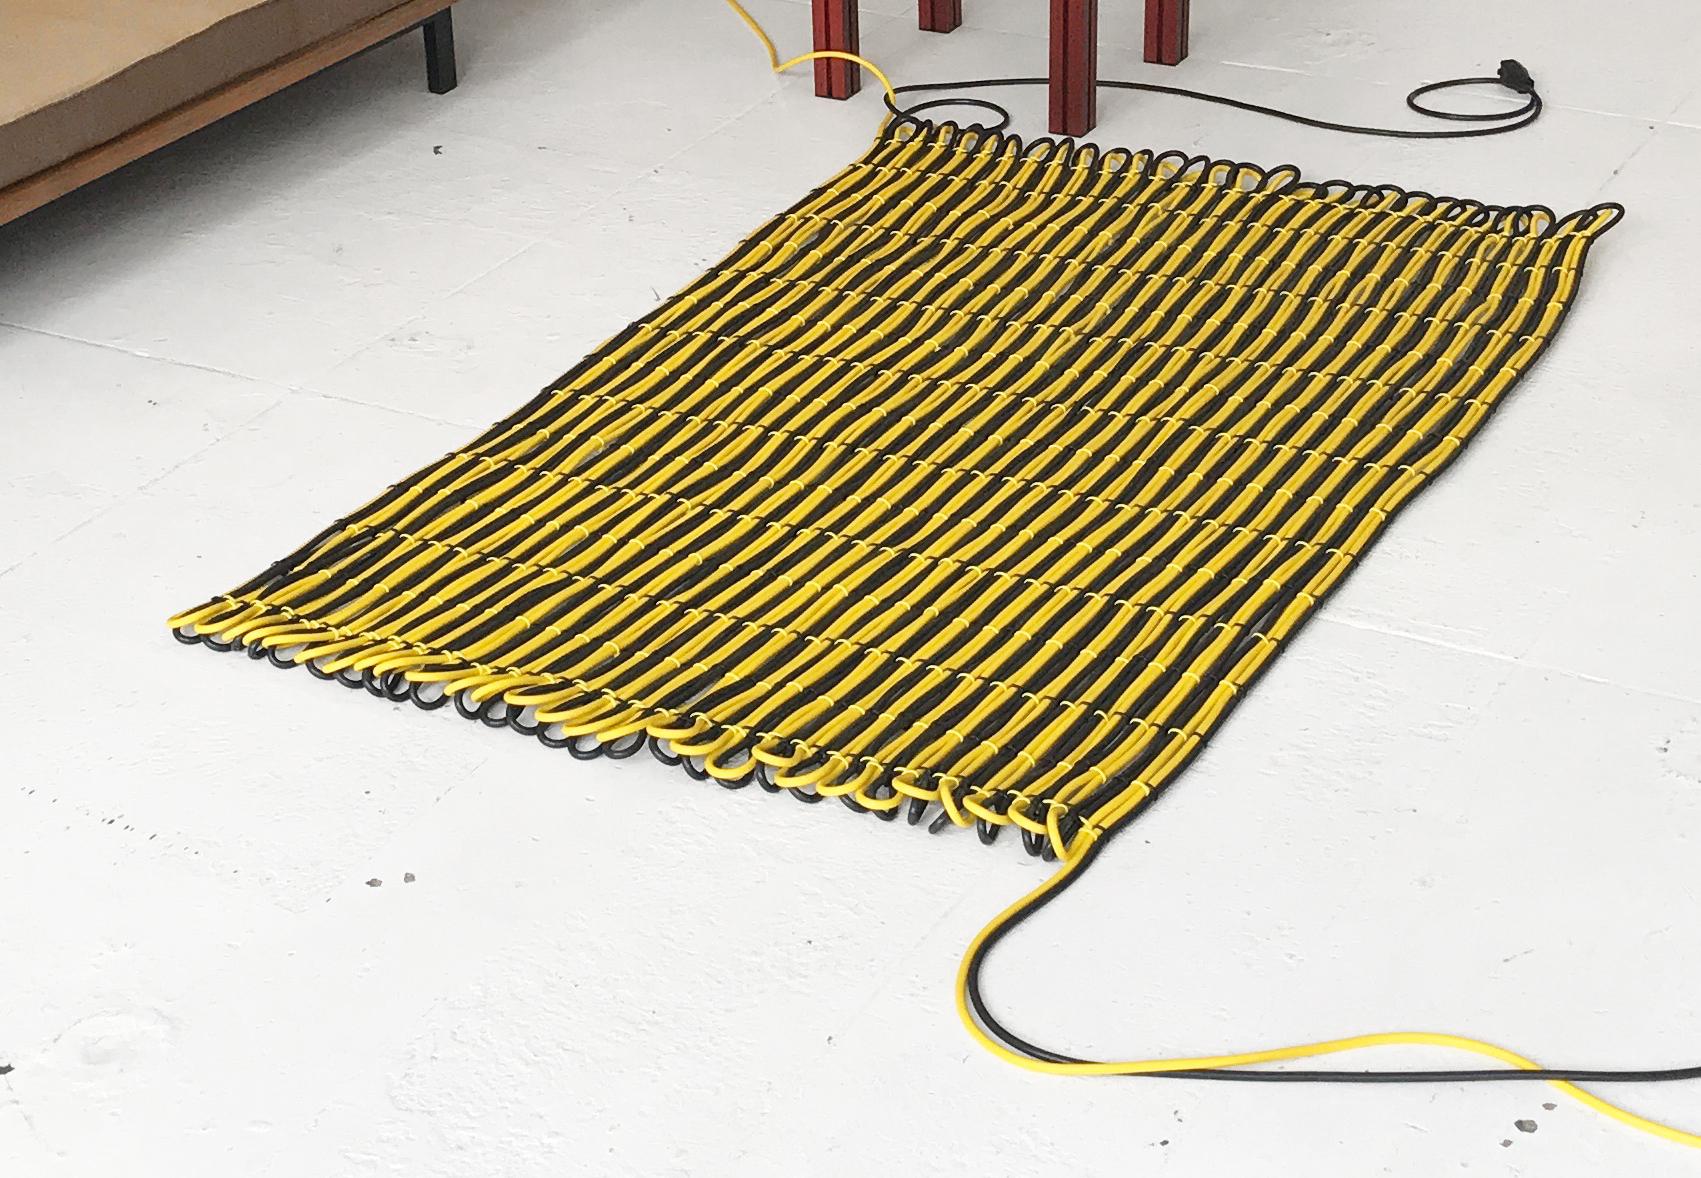 200 Meter Cable Wall rug / tapestry
Dimensions: W 105 x L 160 cm (˜ 1.7 m2 surface)
Materials: PVC electricity cable, cable clips, country specific plug and socket.
Available cable colours: black, yellow, orange, blue.

Cable rugs were originally